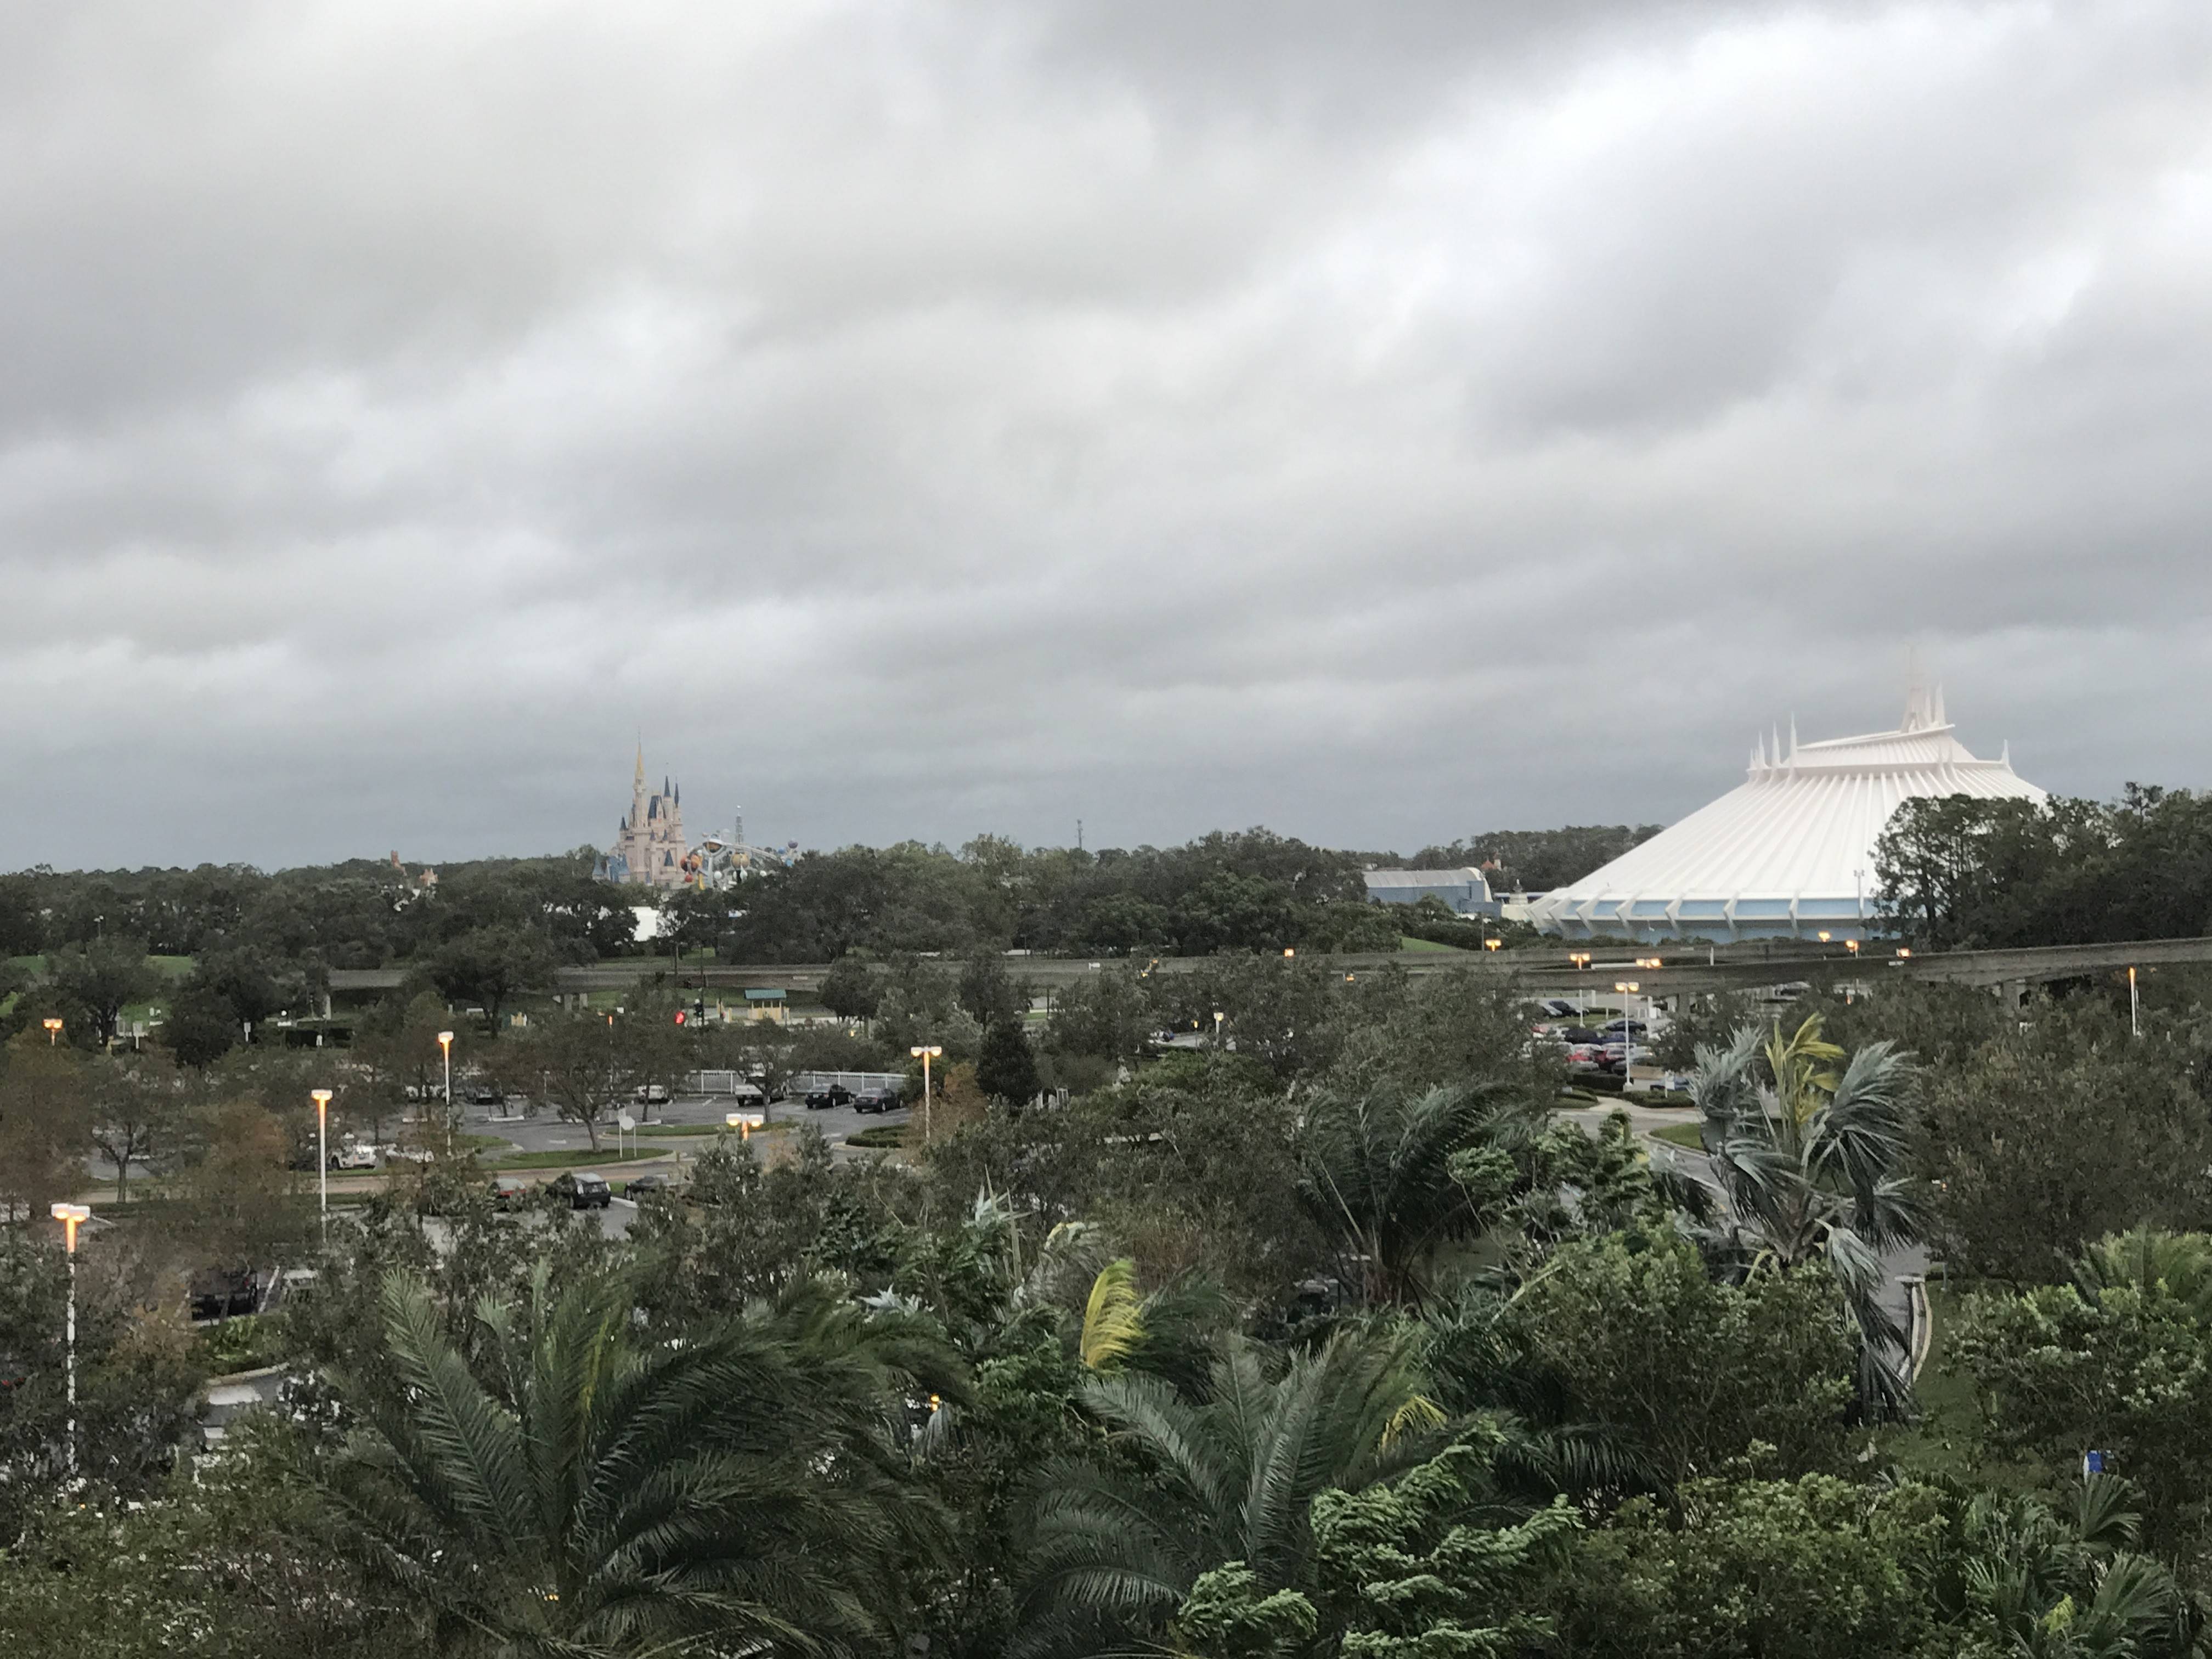 Magic Kingdom post-Irma viewed from the Contemporary. Photo by @andysol